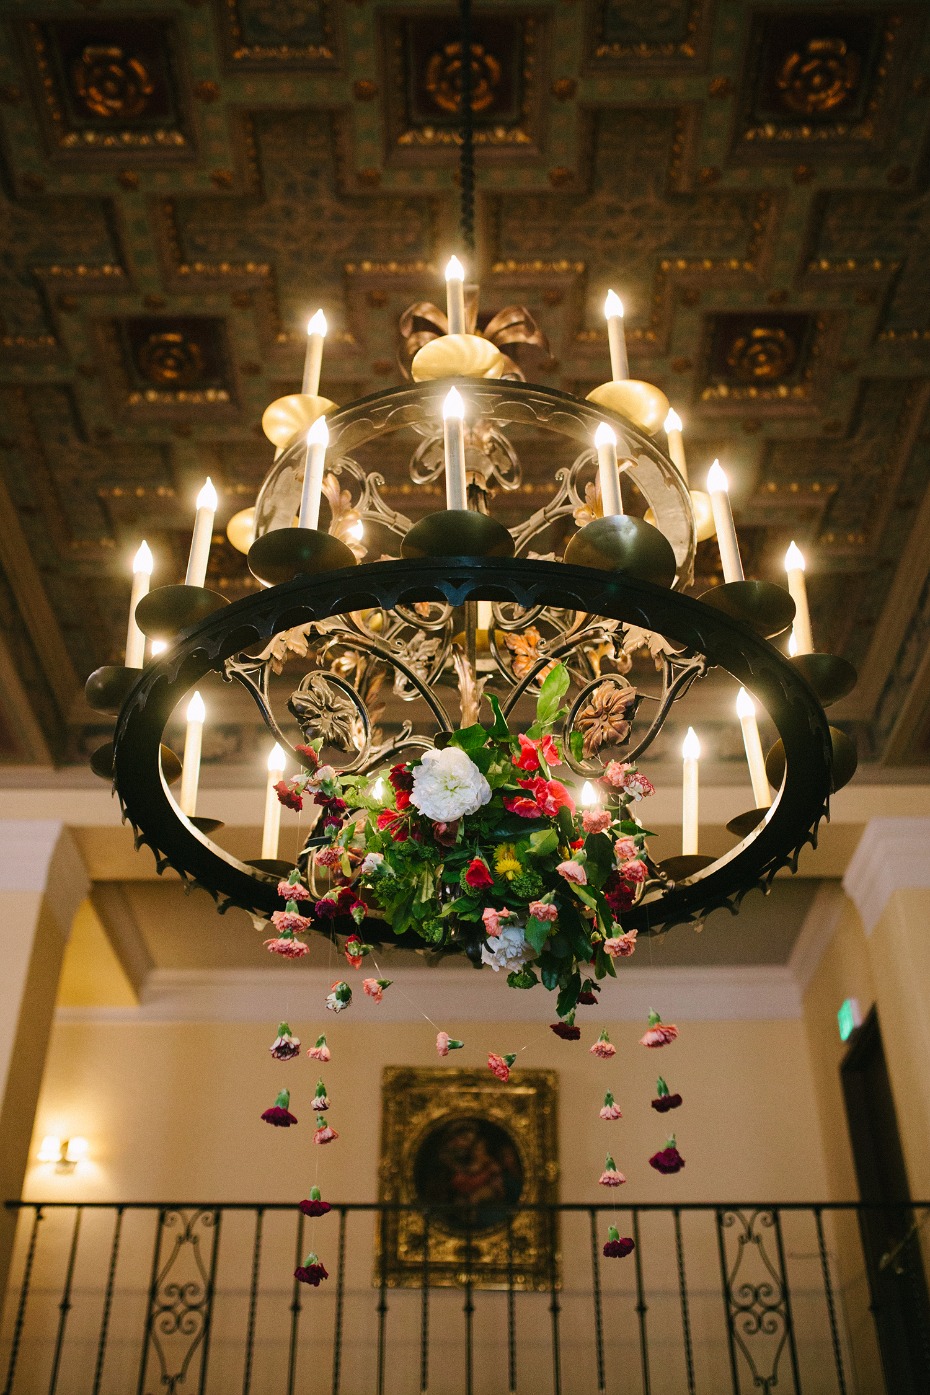 Decorate the chandeliers with flowers